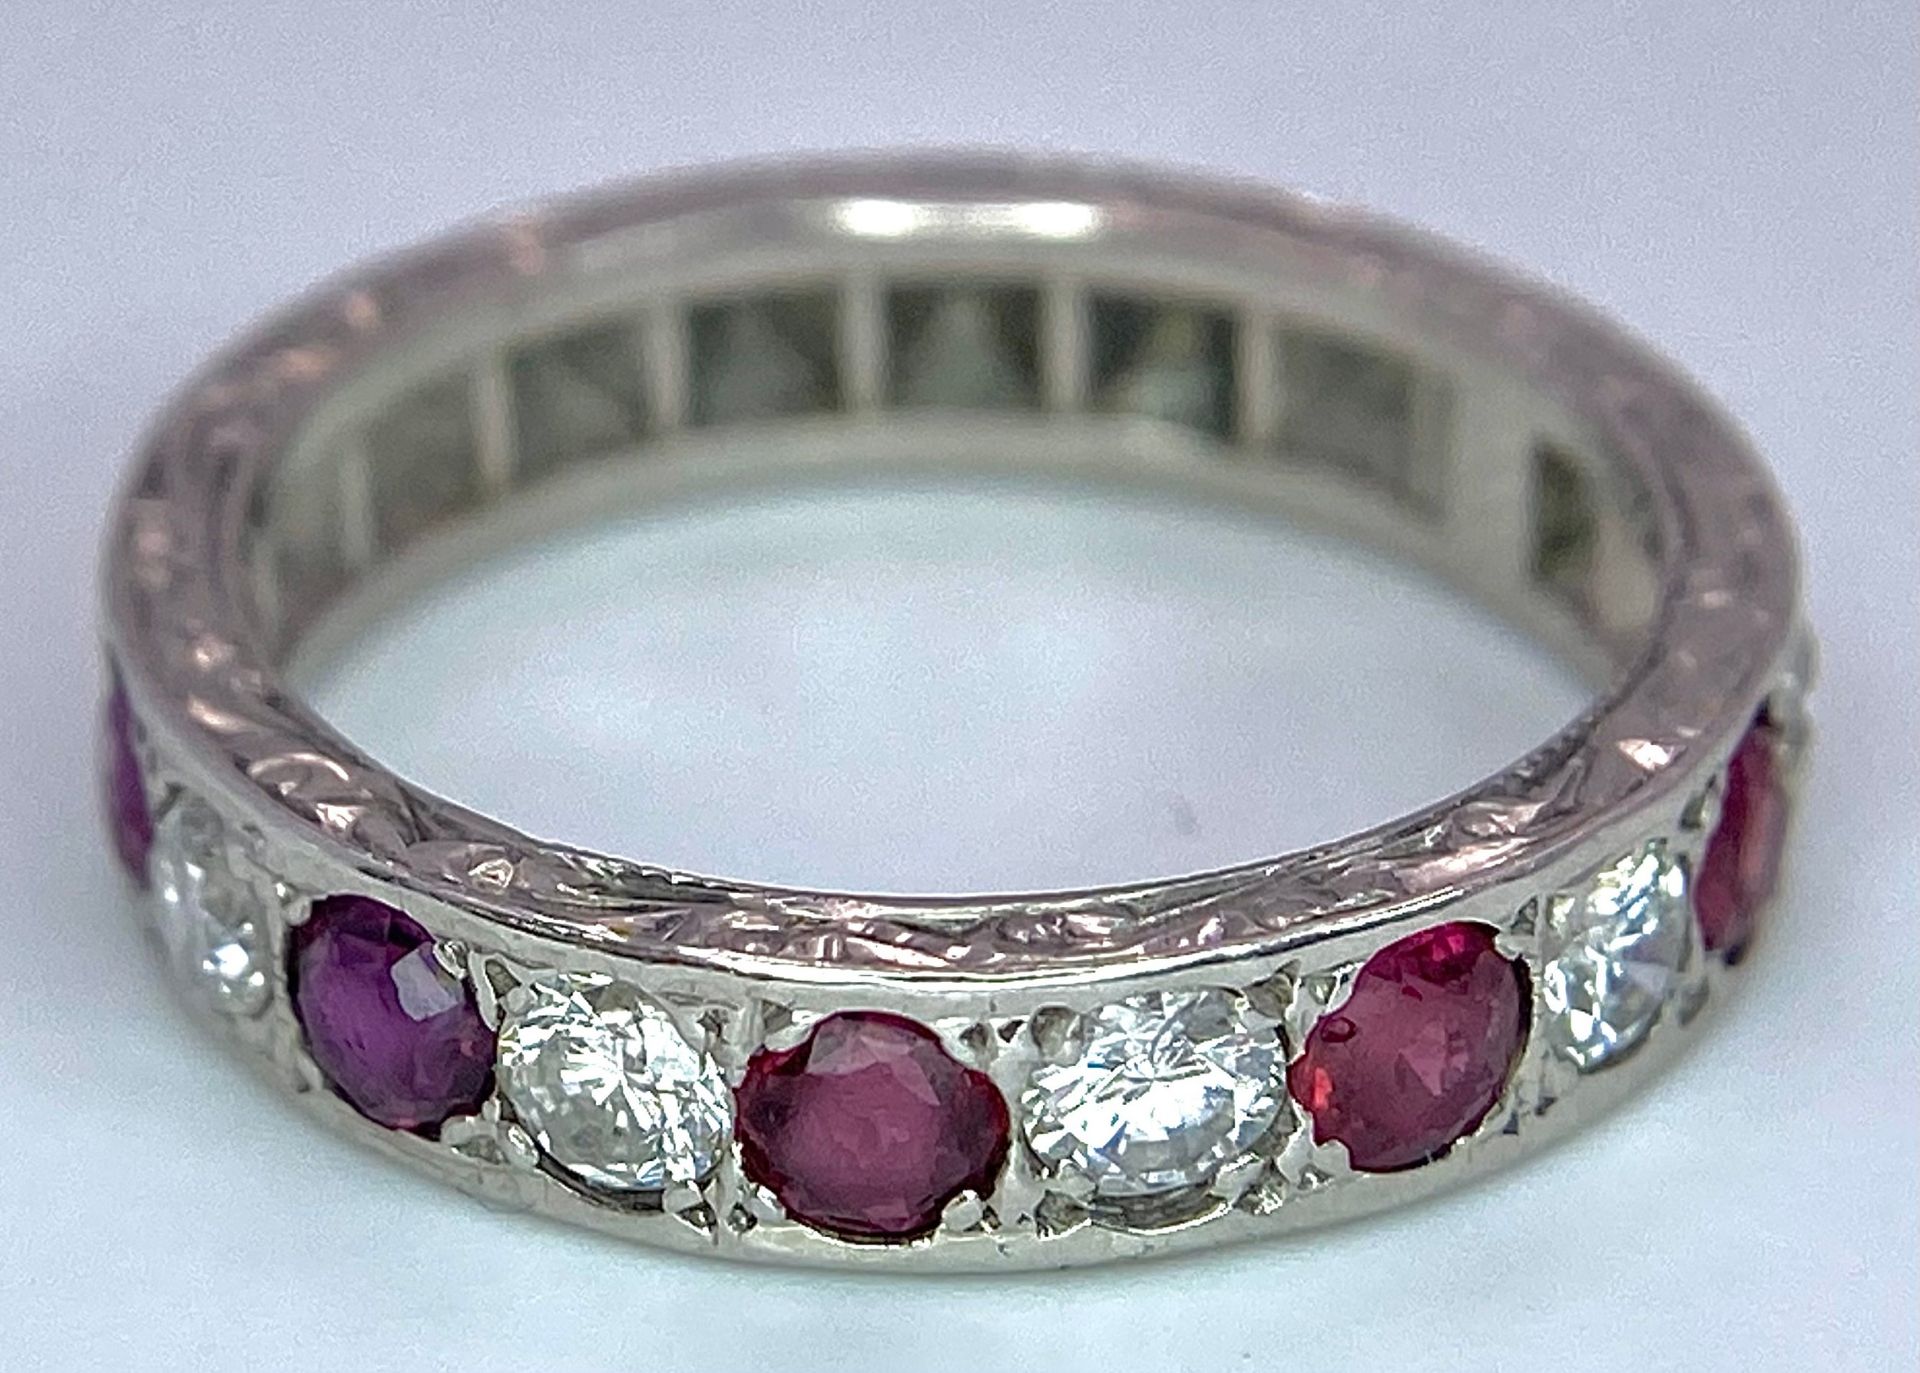 AN 18K WHITE GOLD DIAMOND & RUBY BAND RING. 0.25ctw, size L, 4.1g total weight. Ref: SC 9038 - Image 3 of 4